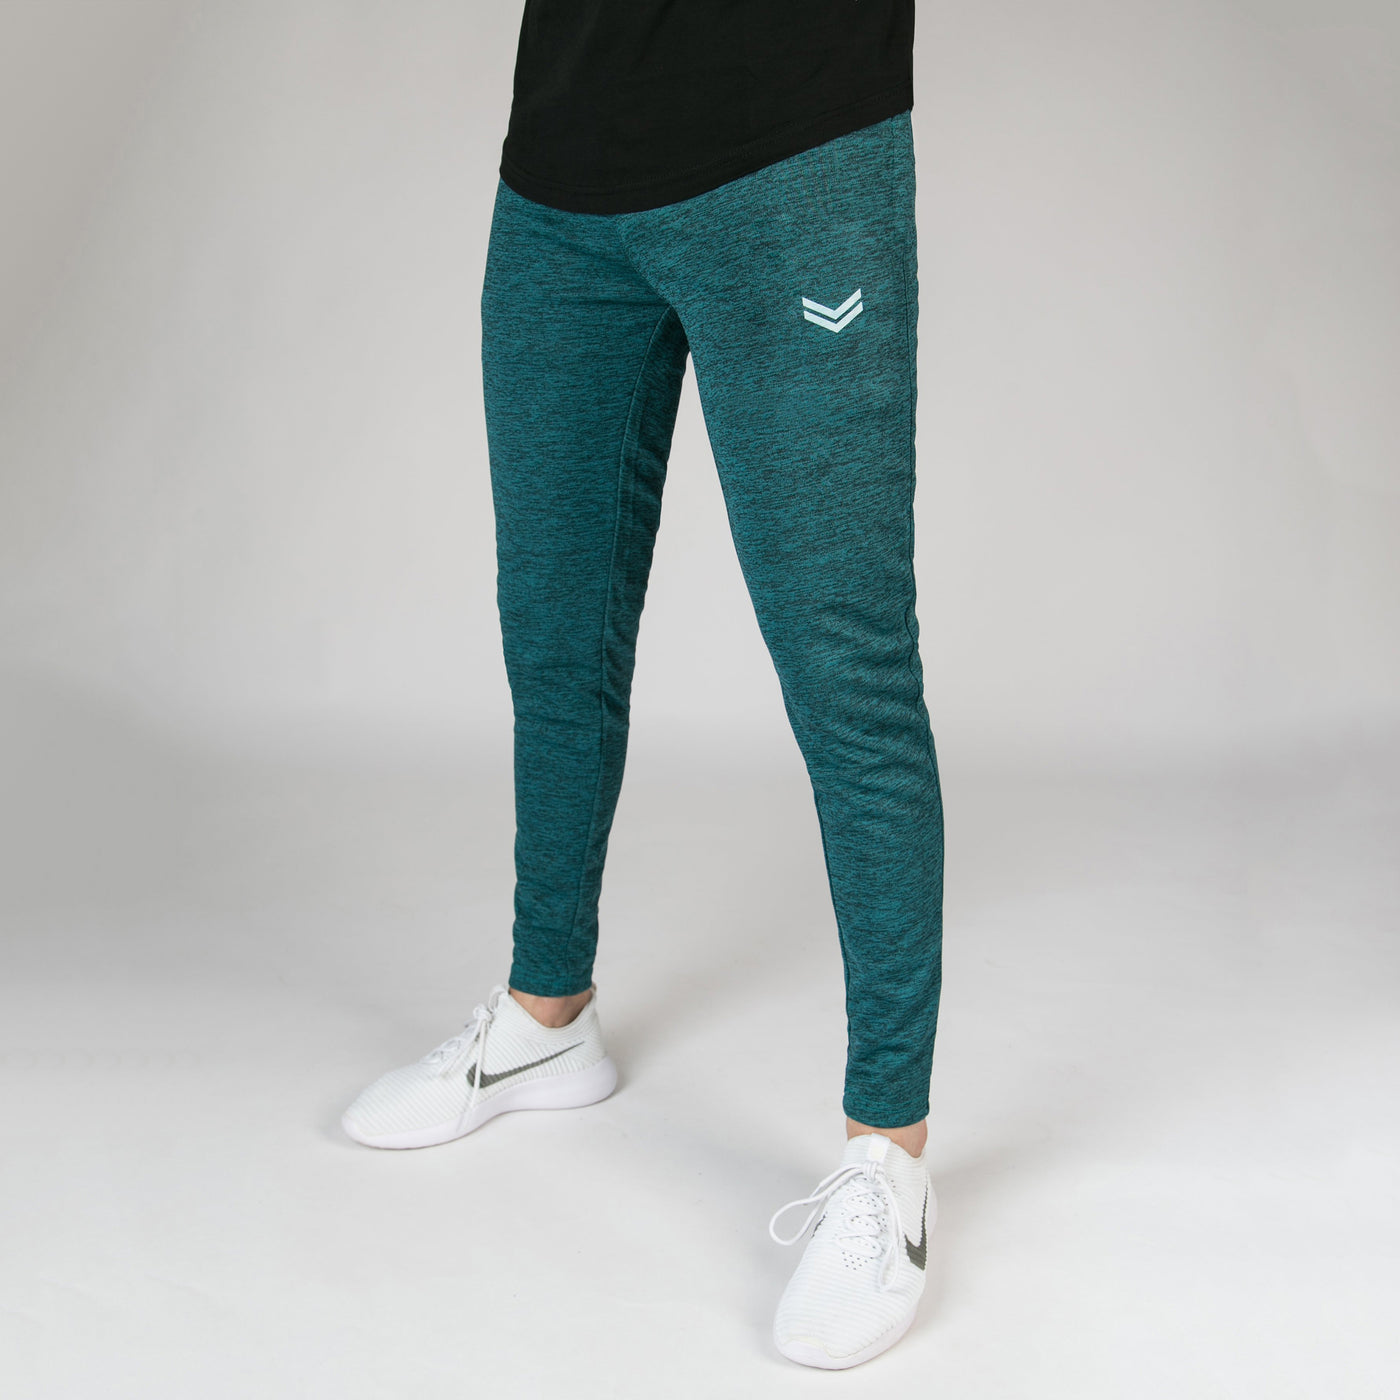 Teal Textured Quick Dry Bottoms